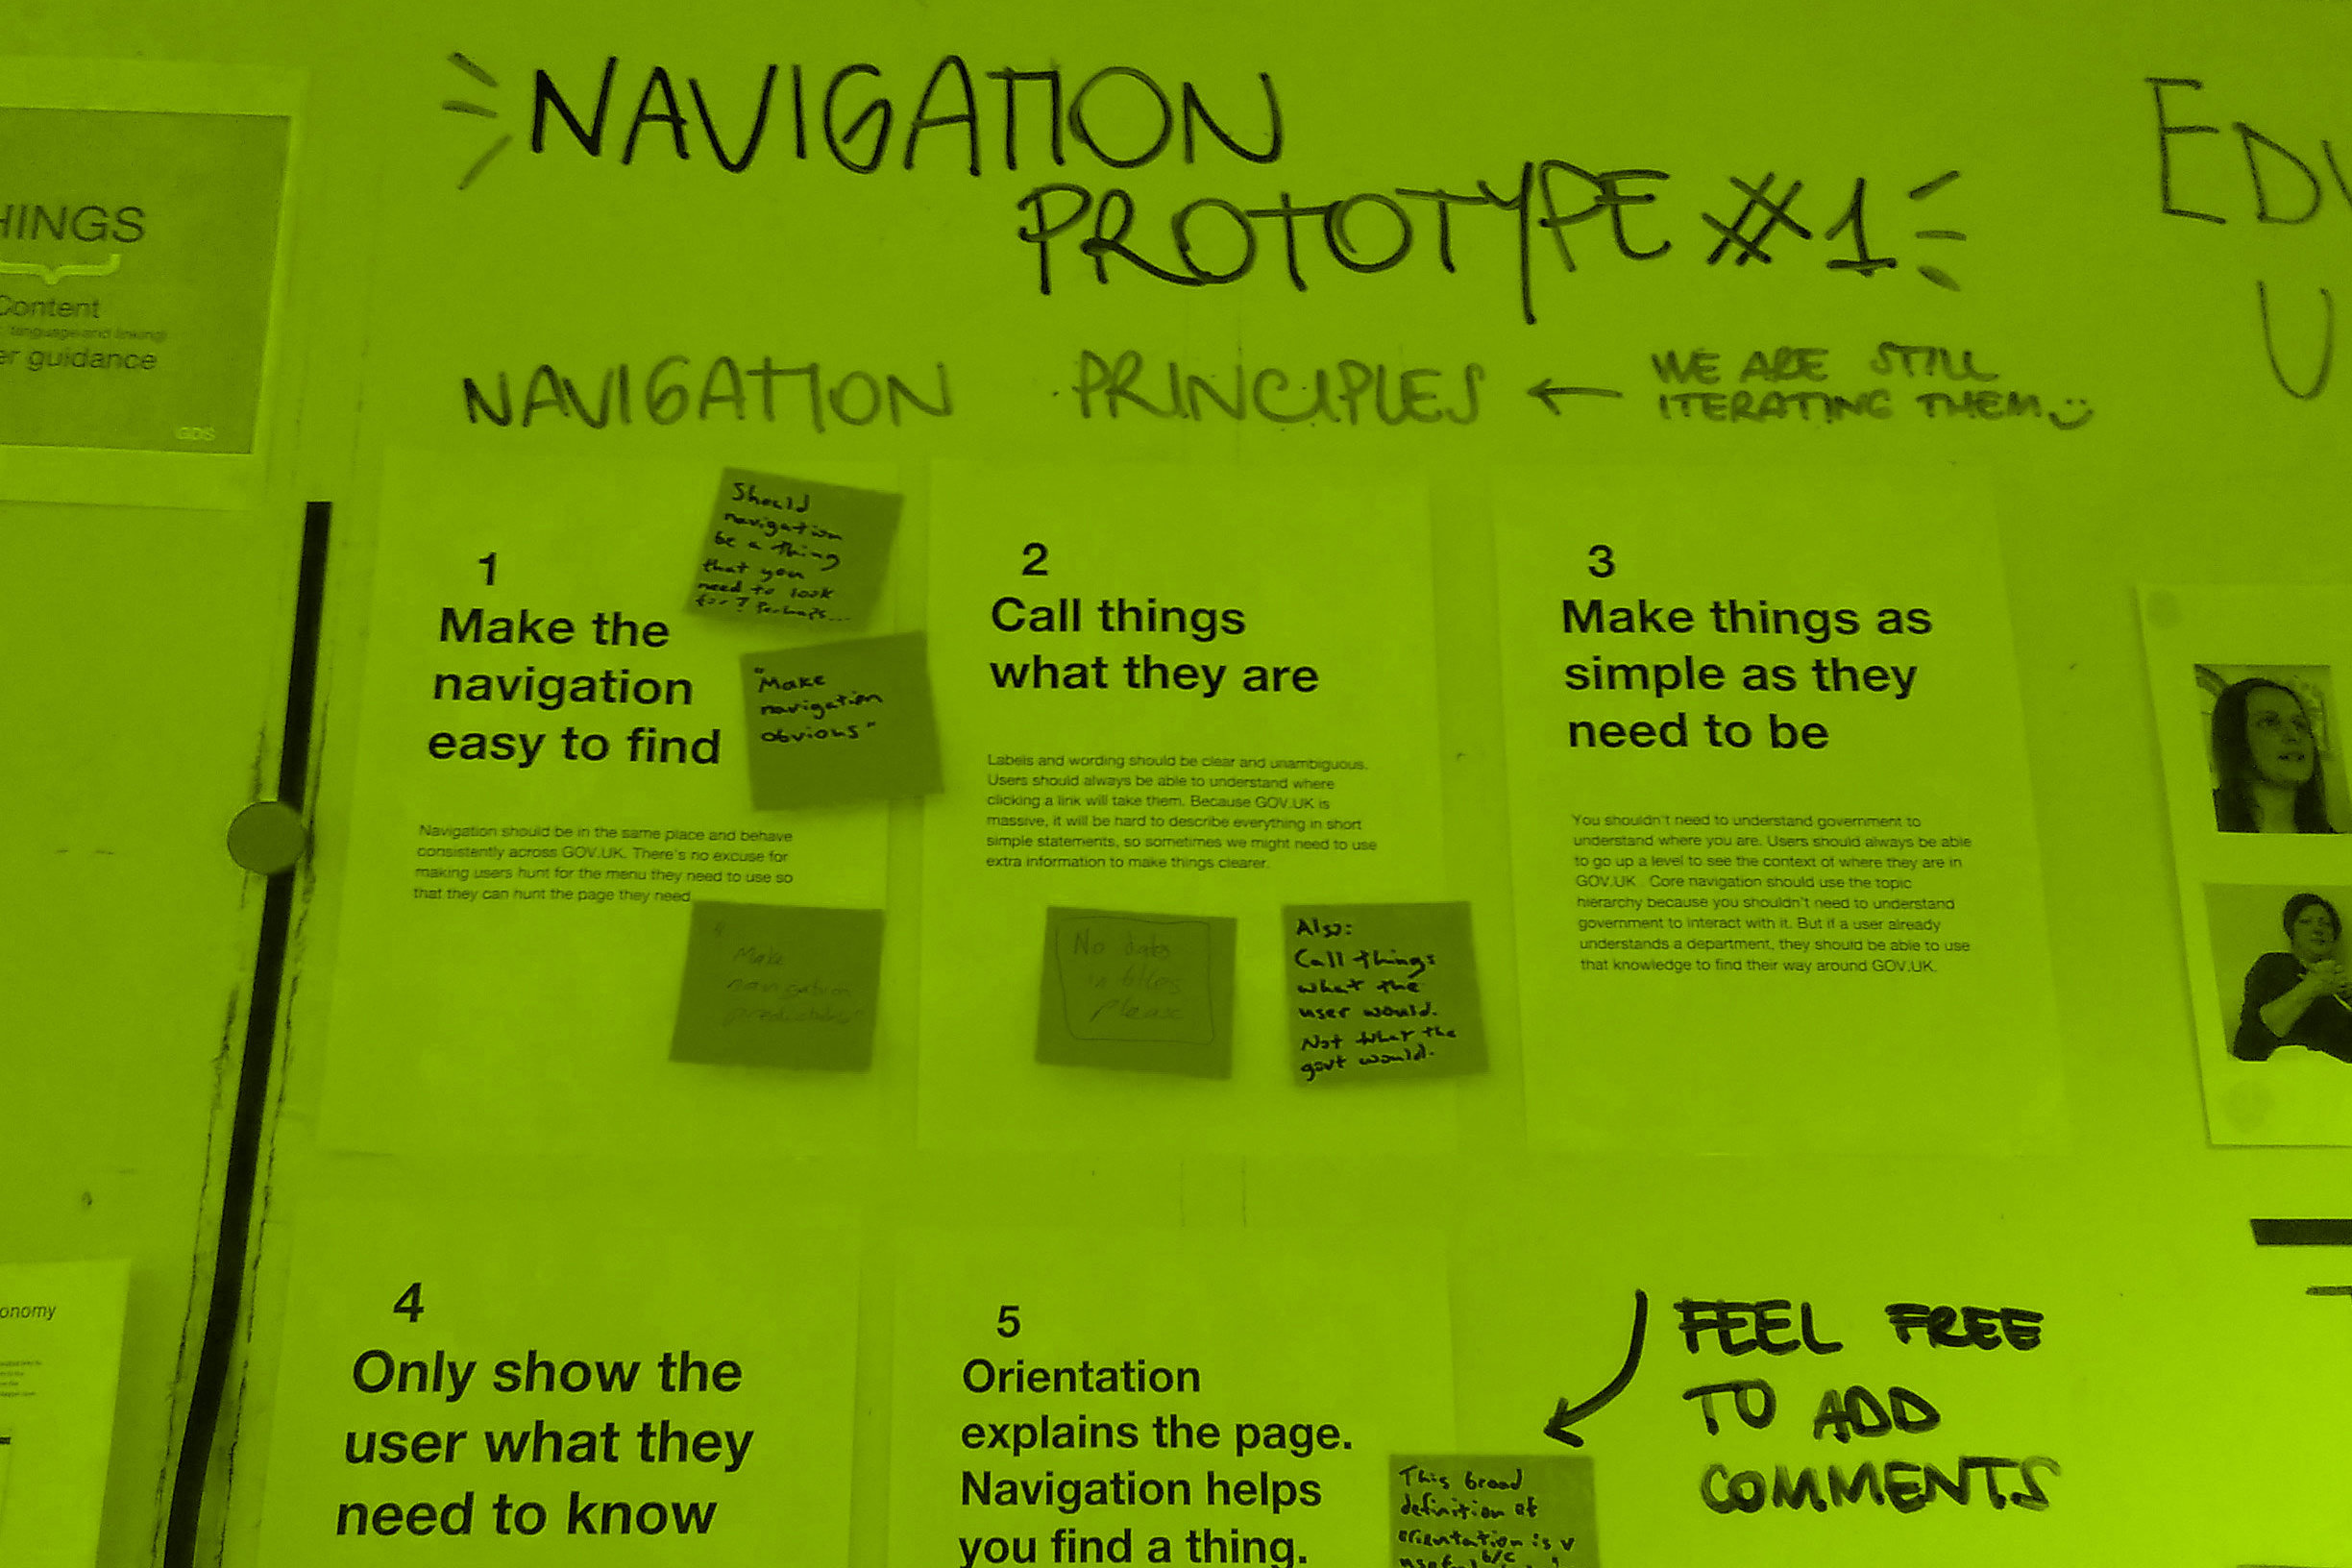 The principles for the navigation mission printed on sheets of paper and stuck on wall